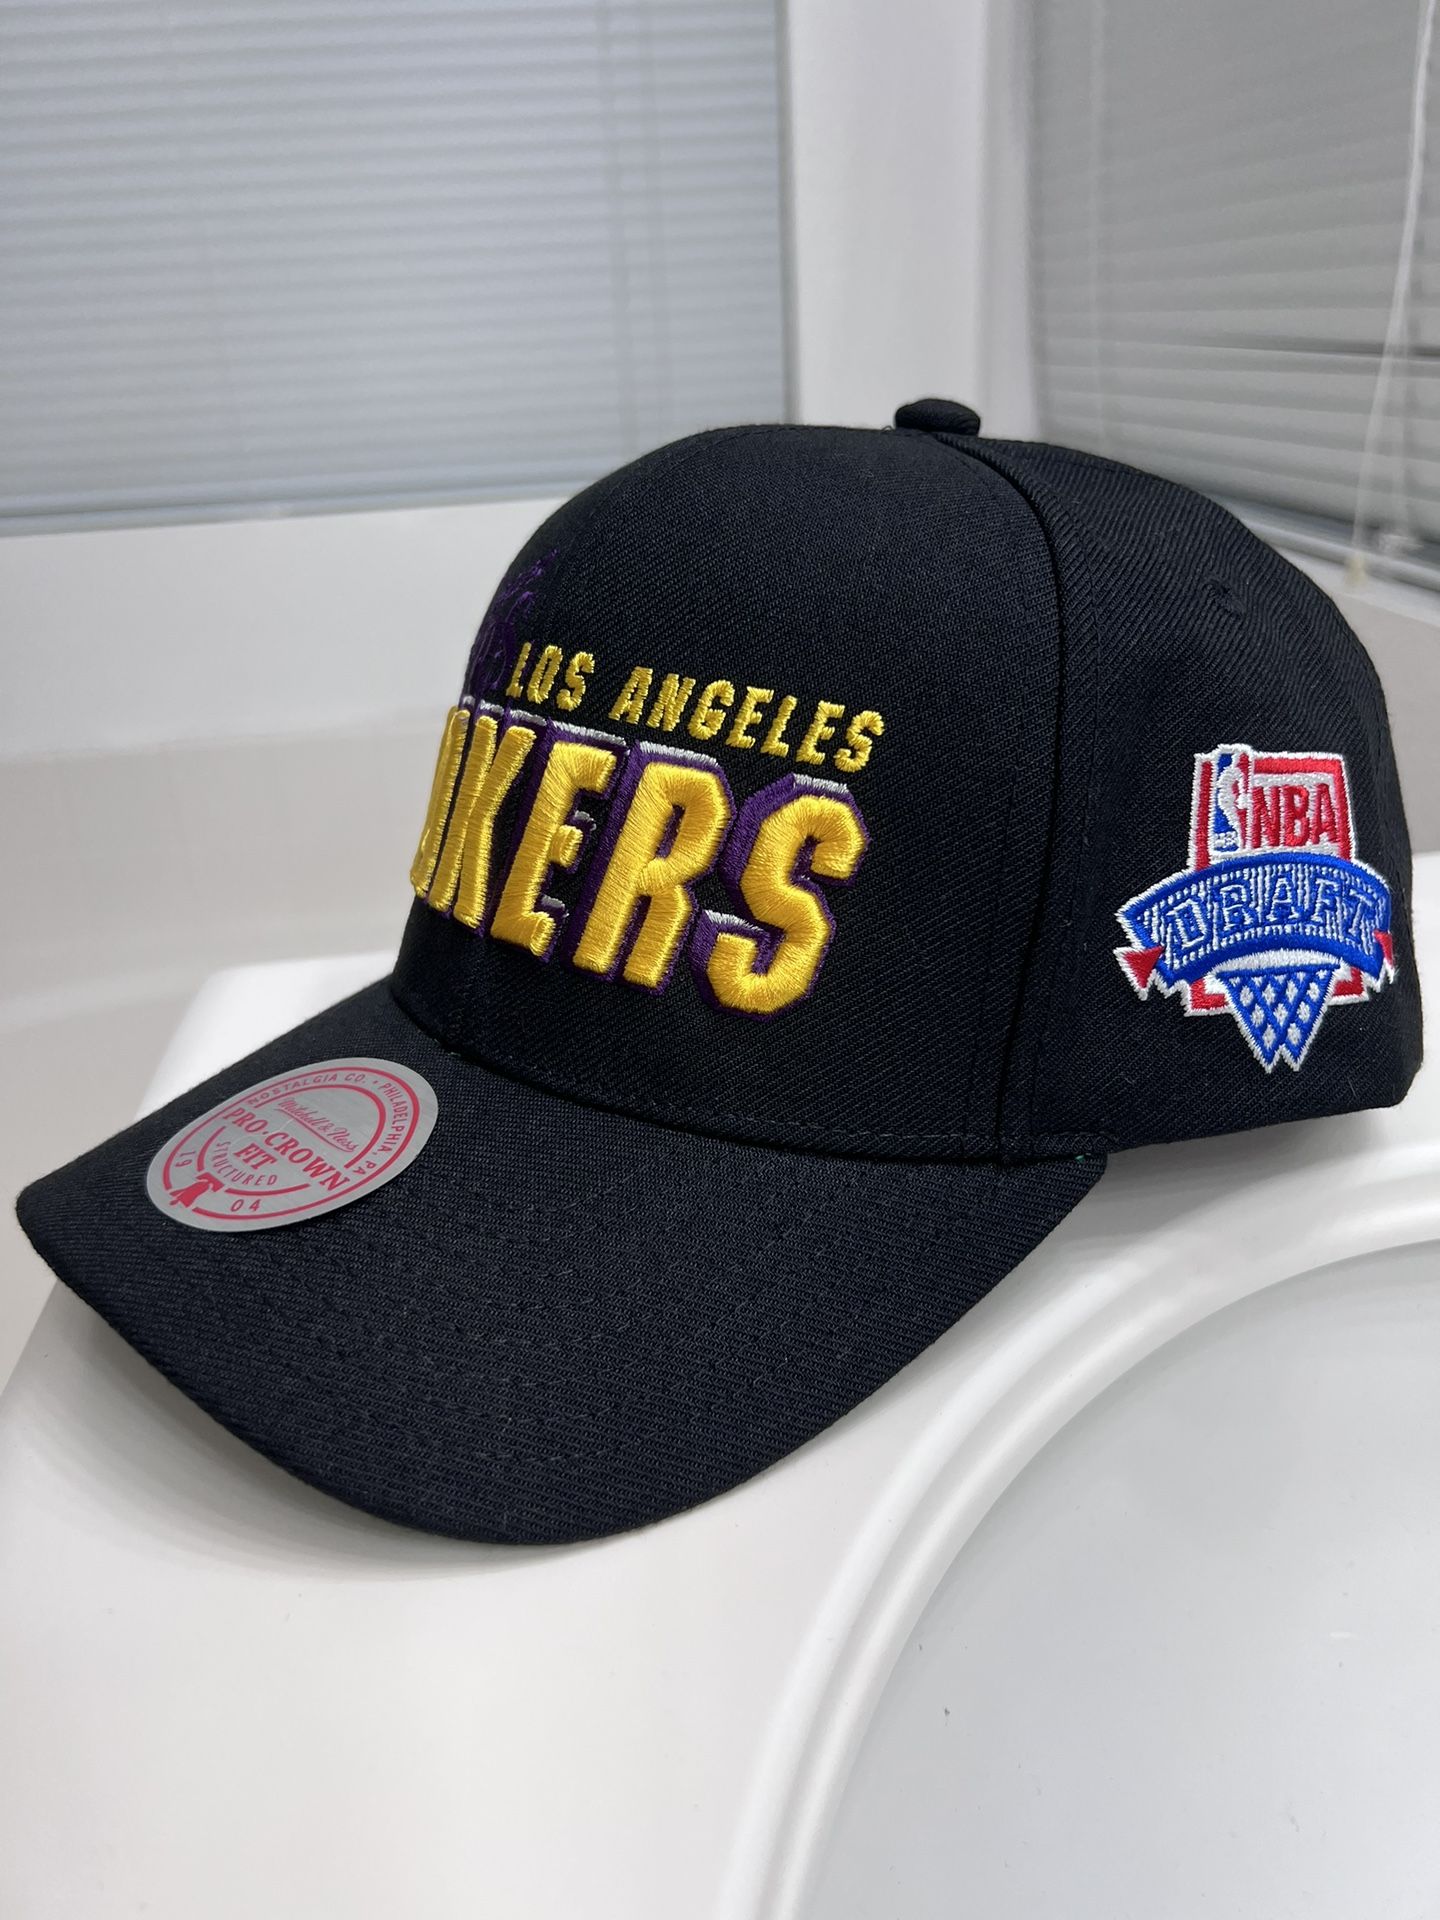 3 Hats, A Michell And Ness Lakers Hat, A Adidas Hat And A NEFF Hat for Sale  in Wichita, KS - OfferUp